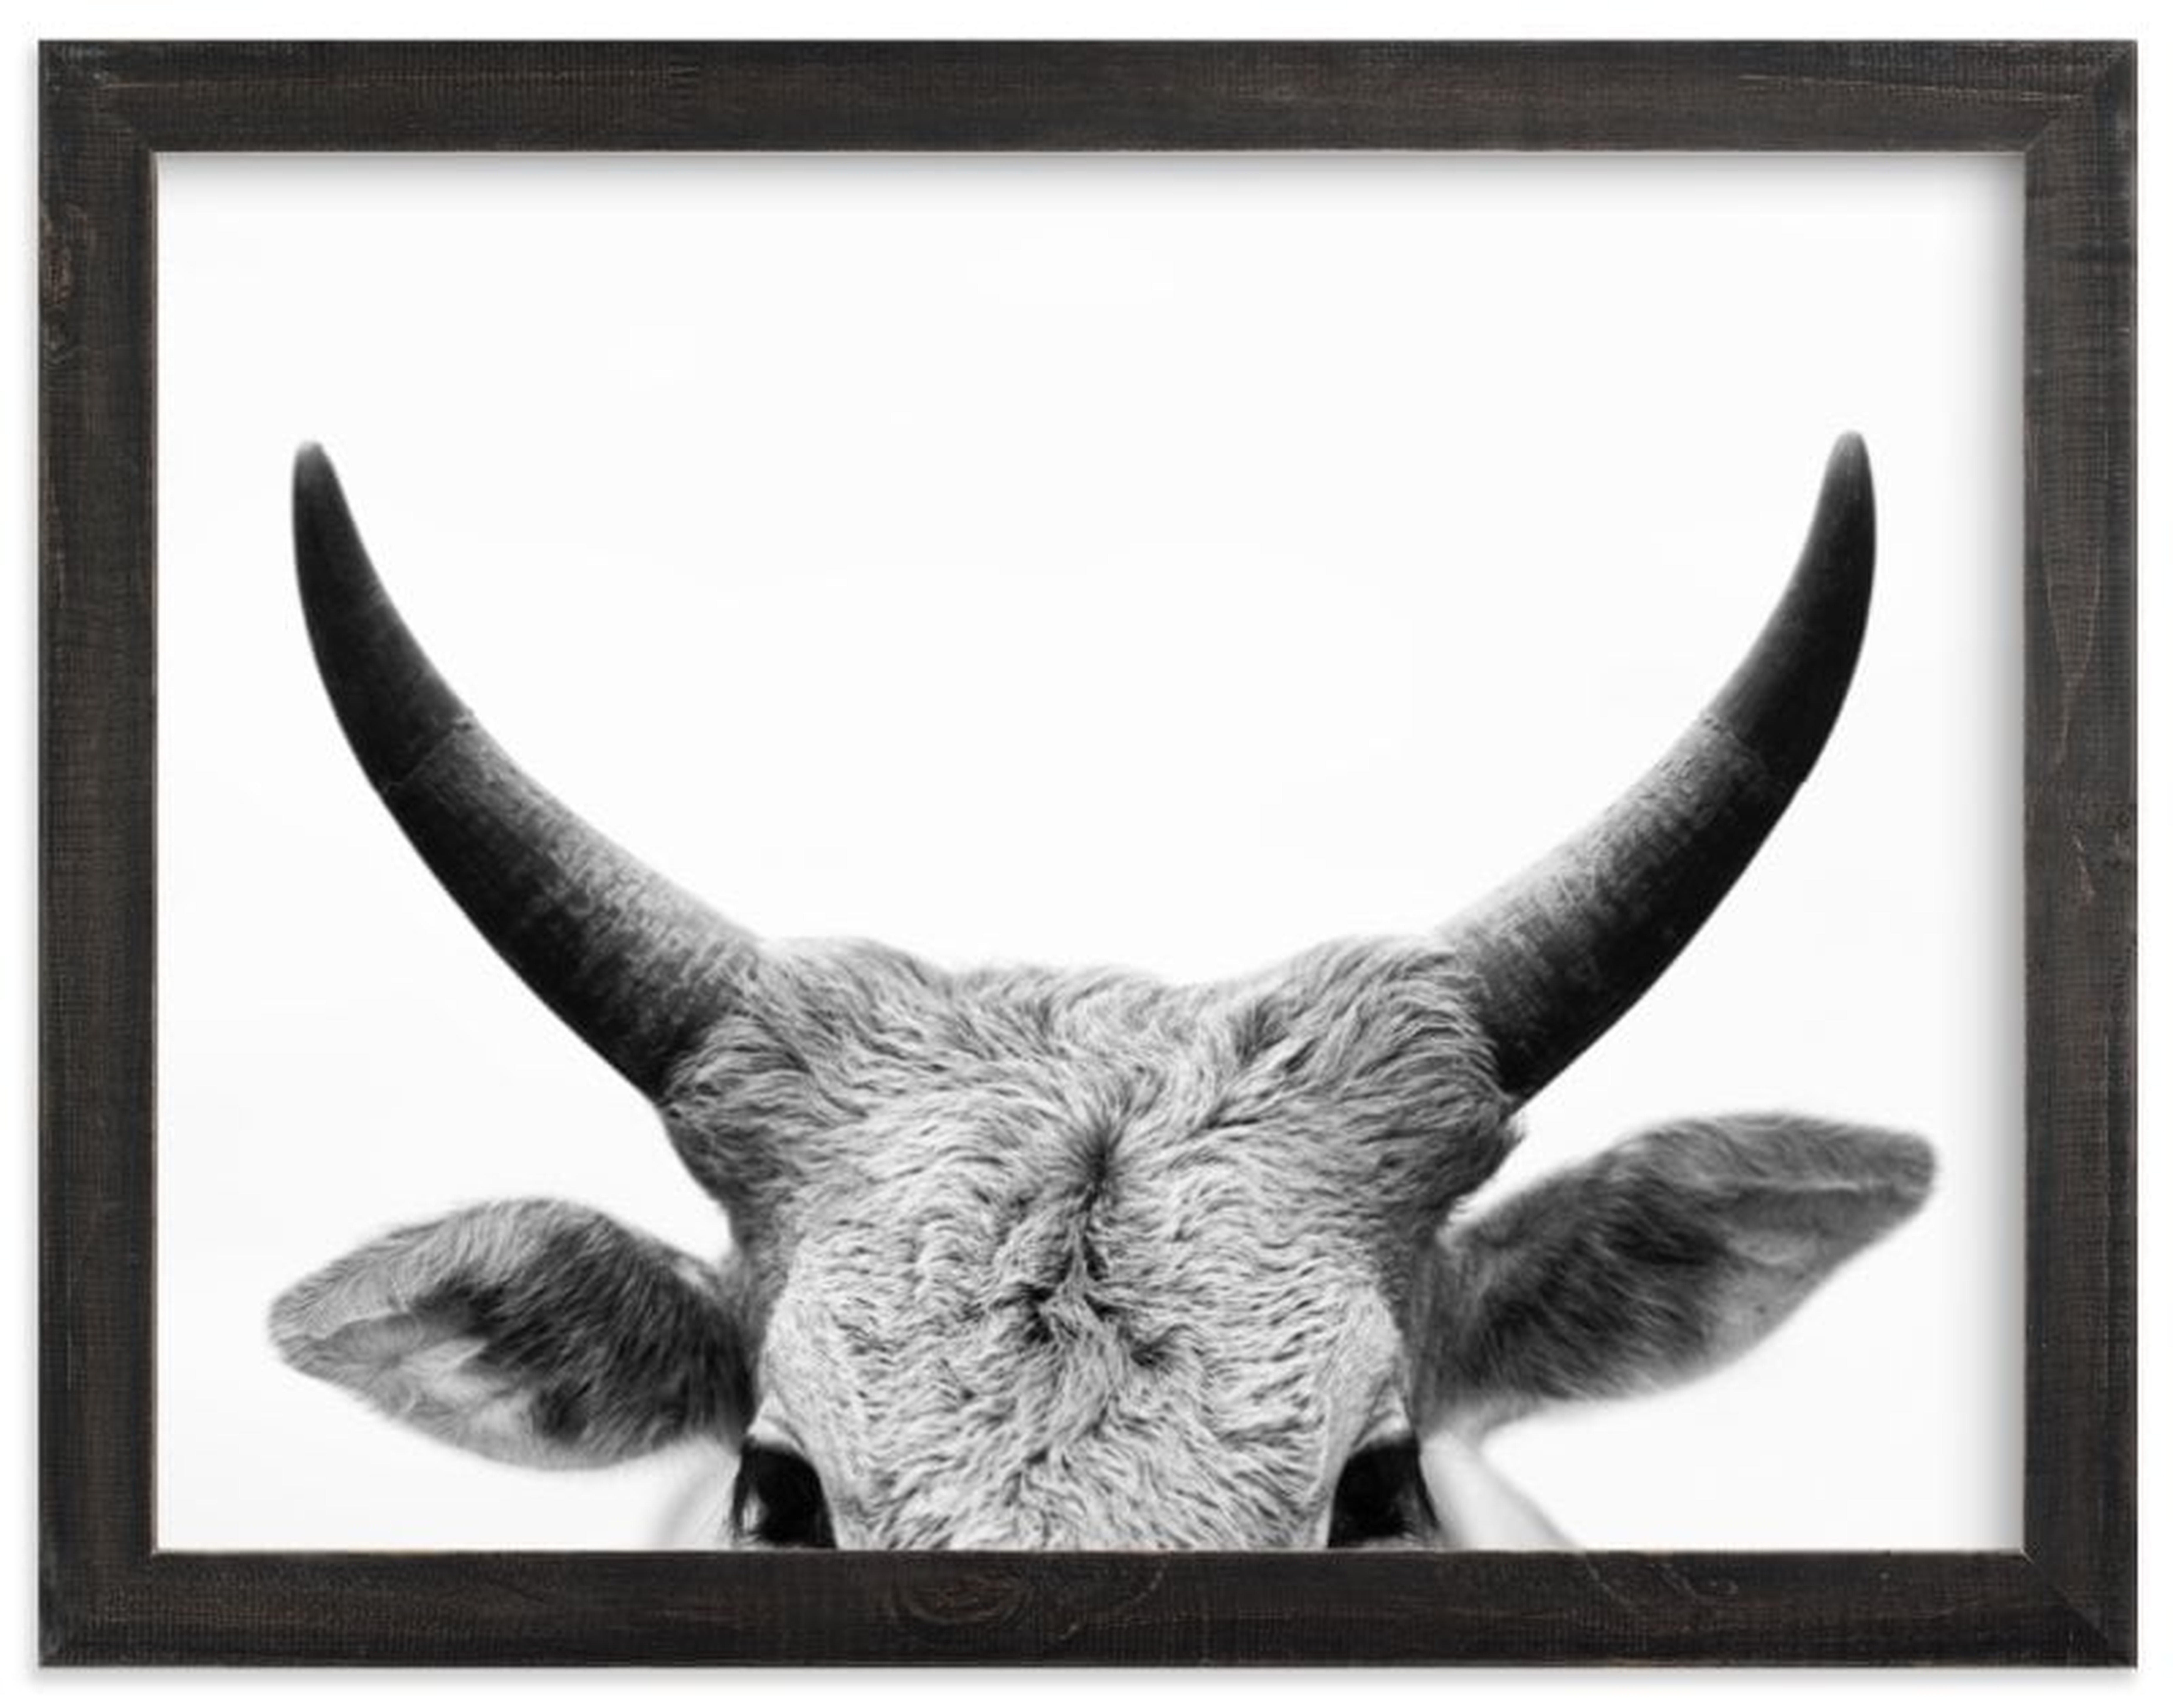 jane gallagher  - 40"x30" - Distressed Charcoal Stain Frame - Minted